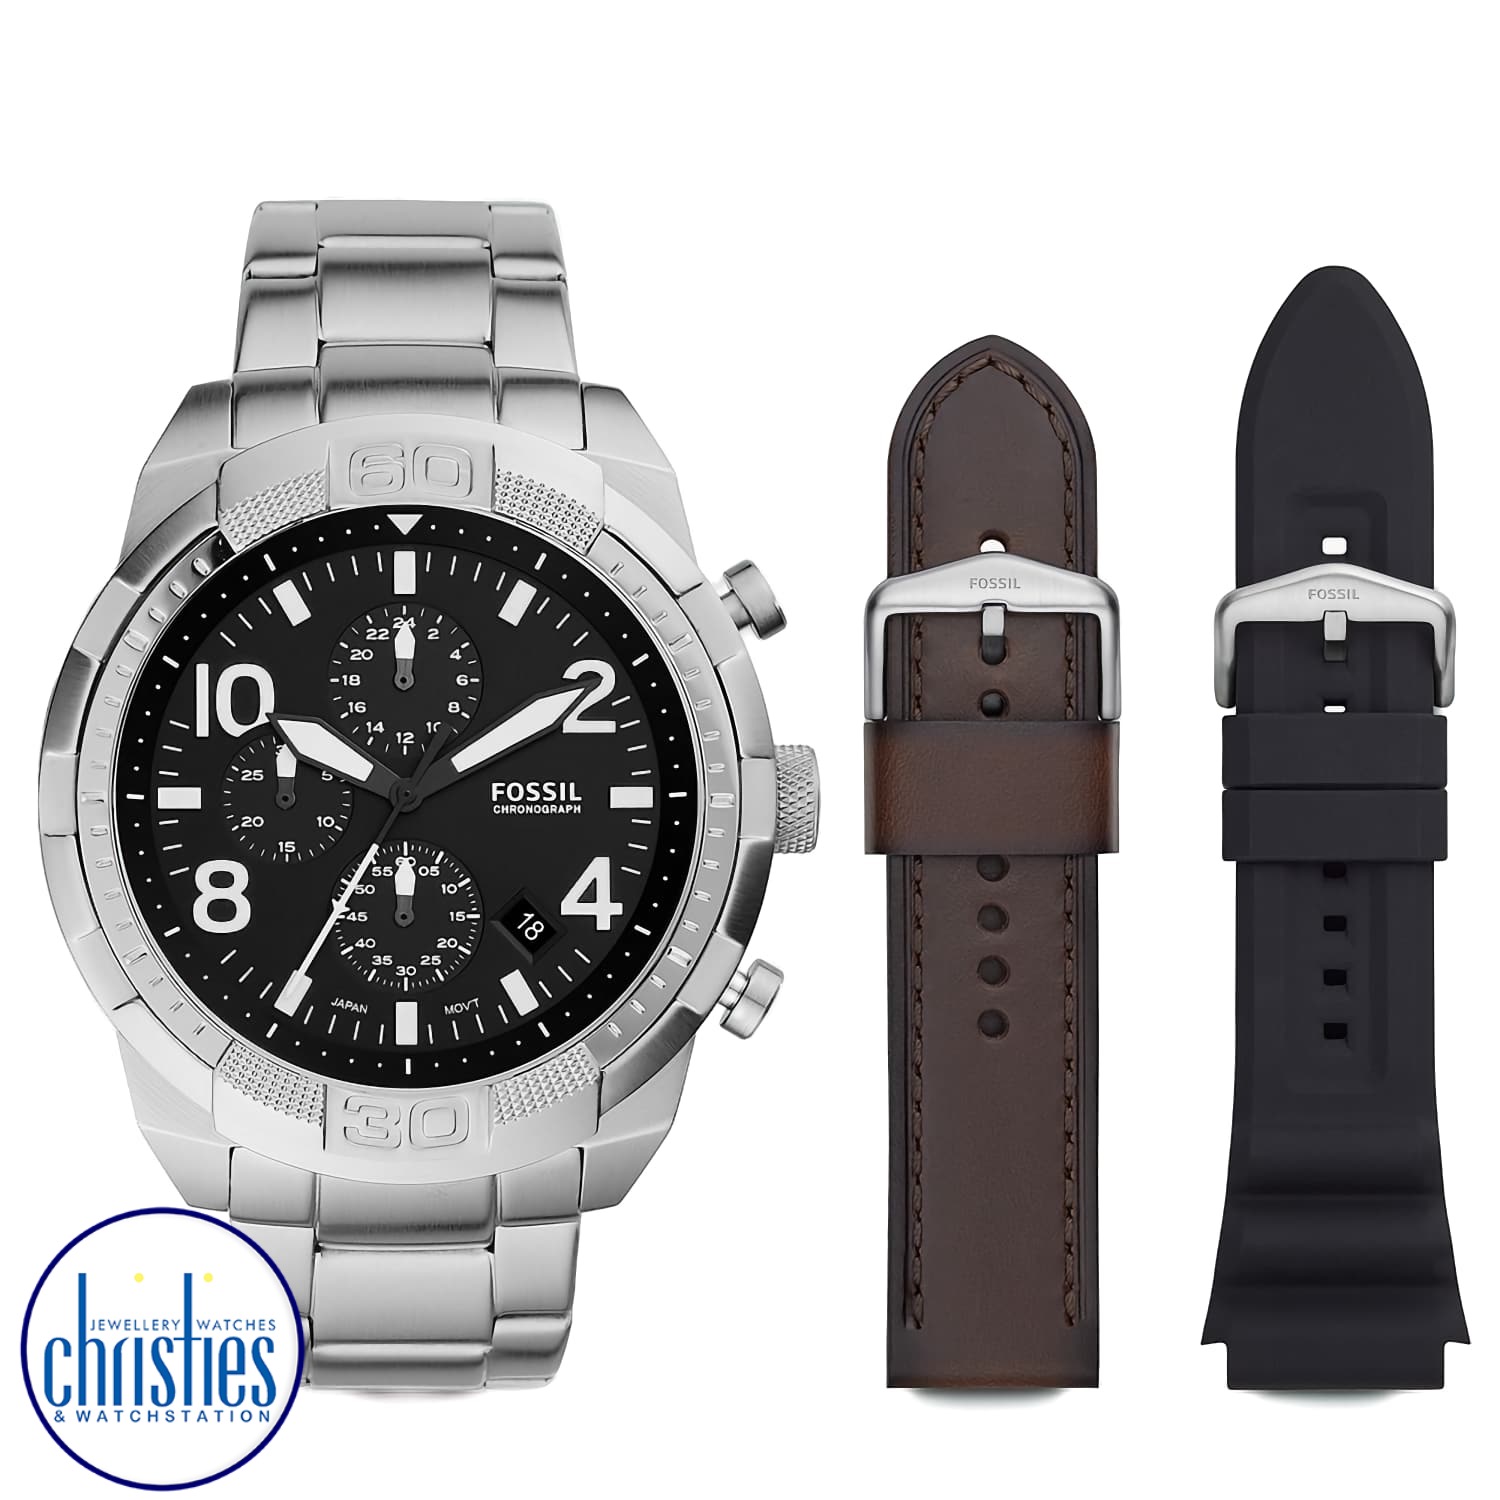 FS5968SET Fossil Bronson Chronograph Stainless Steel Watch and Interchangeable Strap Set. FS5968SET Fossil Bronson Chronograph Stainless Steel Watch and Interchangeable Strap SetAfterpay - Split your purchase into 4 instalments - Pay for your purchase ove